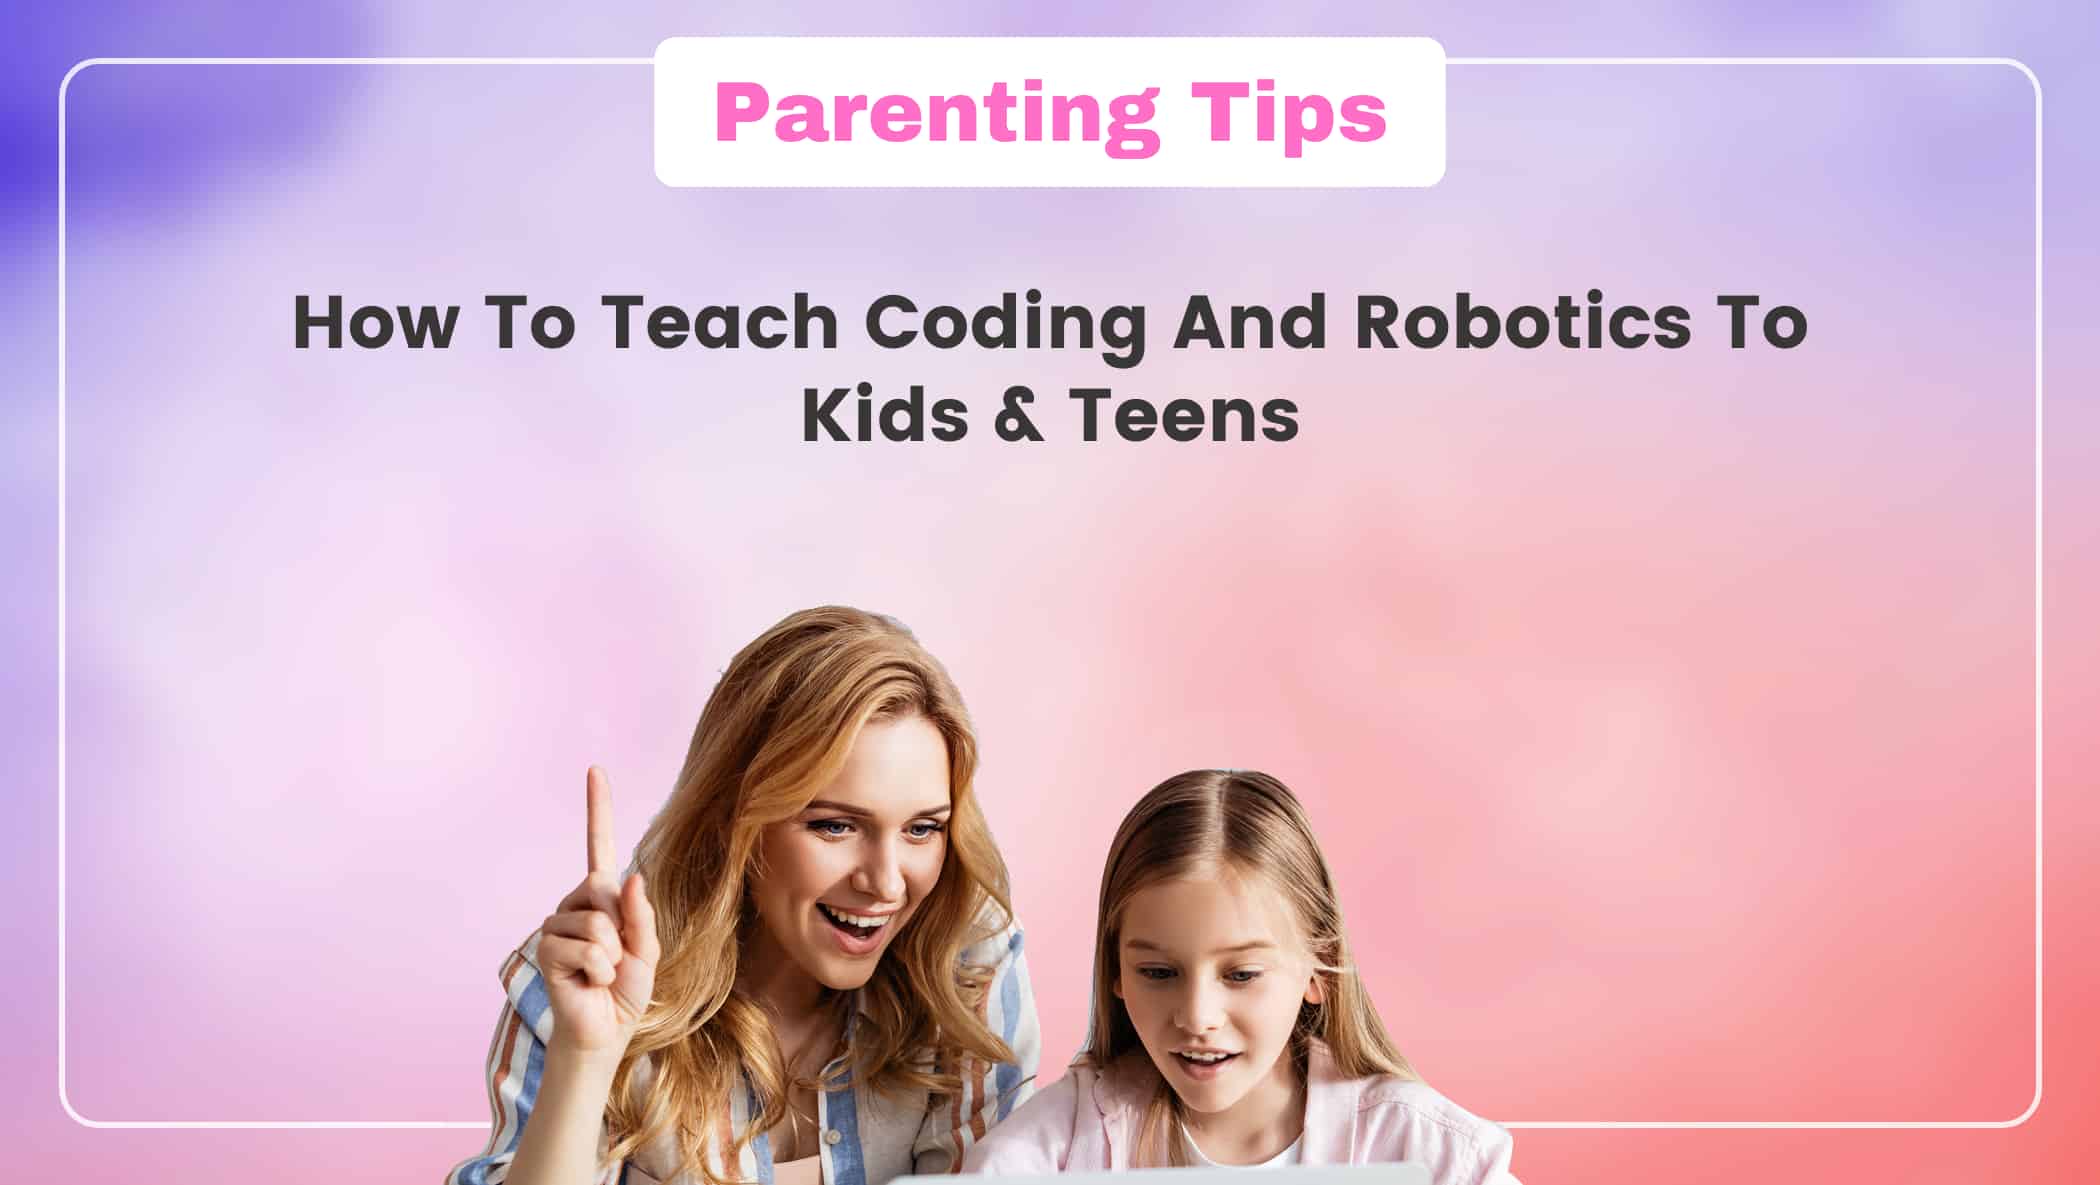 How To Teach Coding And Robotics To Kids & Teens Image